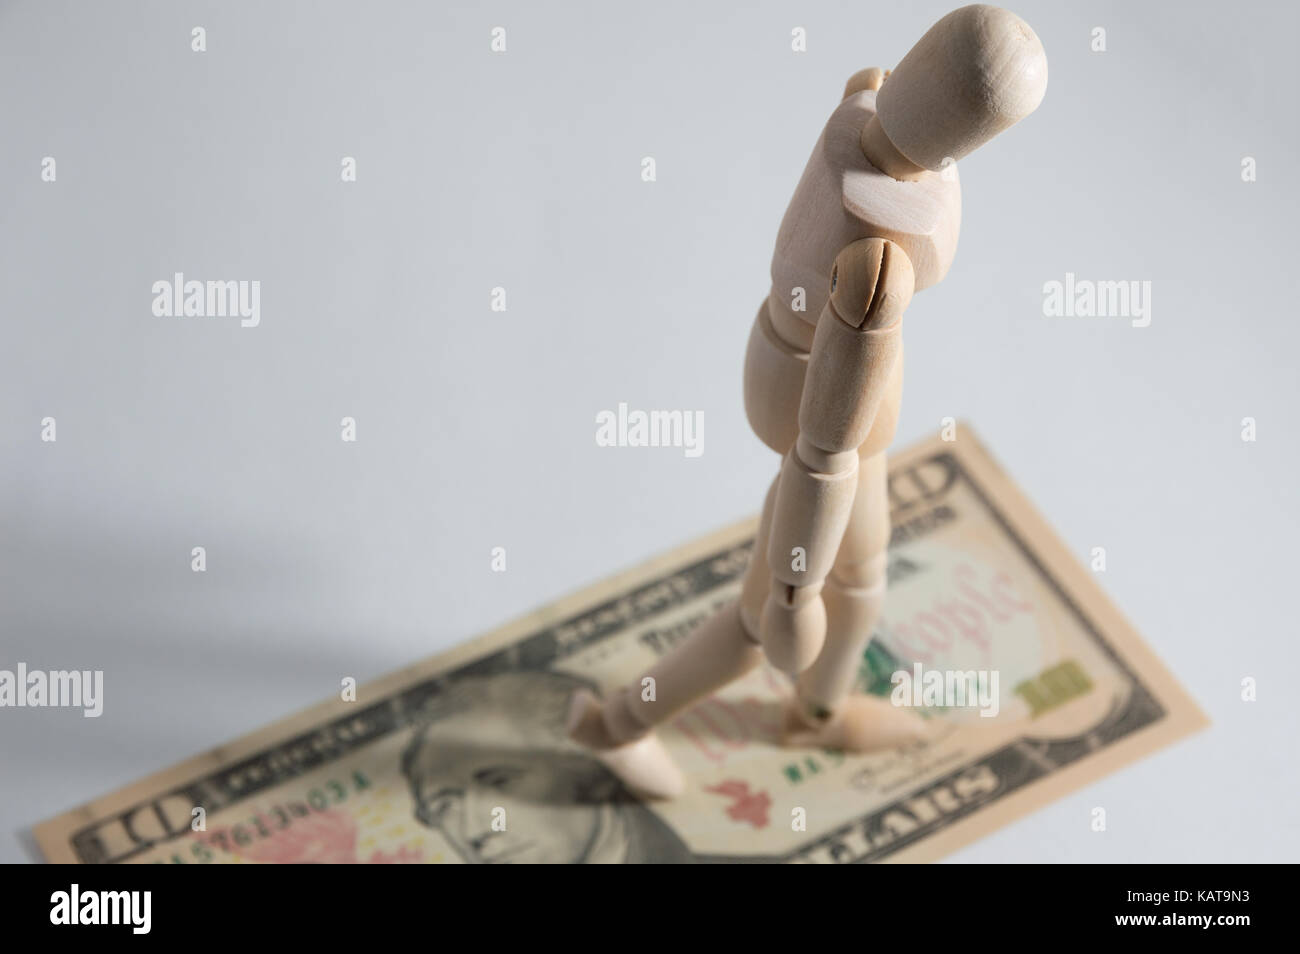 Wooden jointed doll on dollar Stock Photo